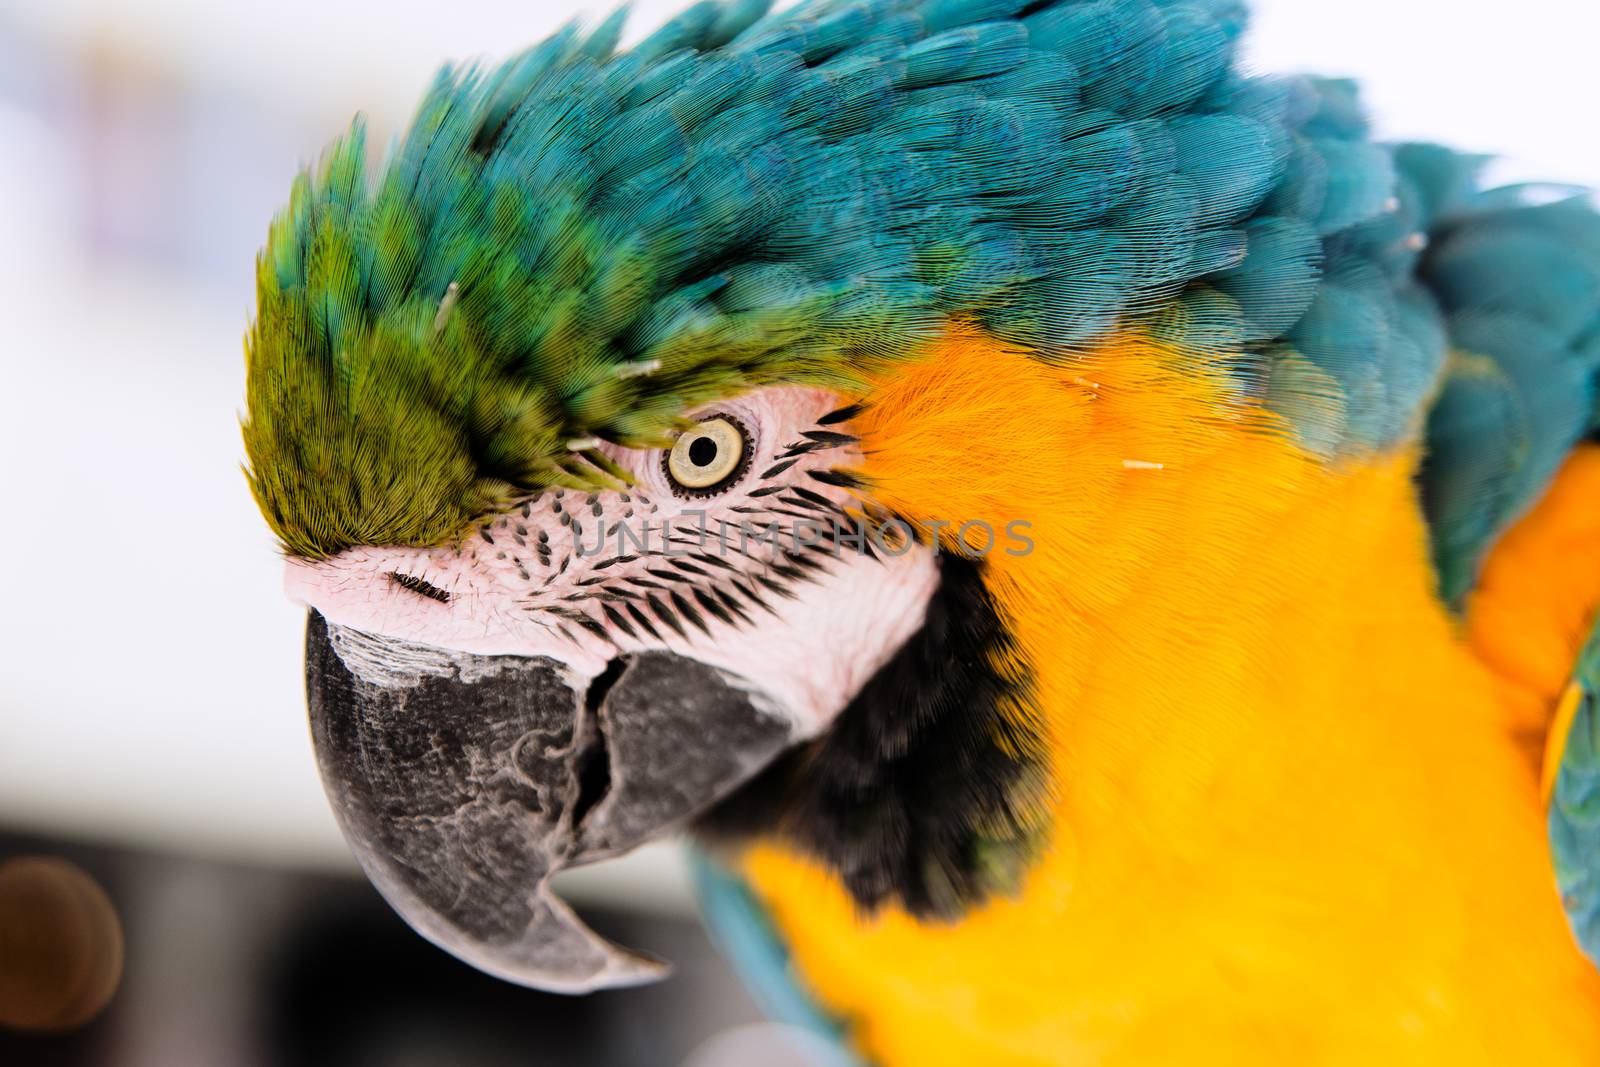 Large parrot stares one eye on the photographer